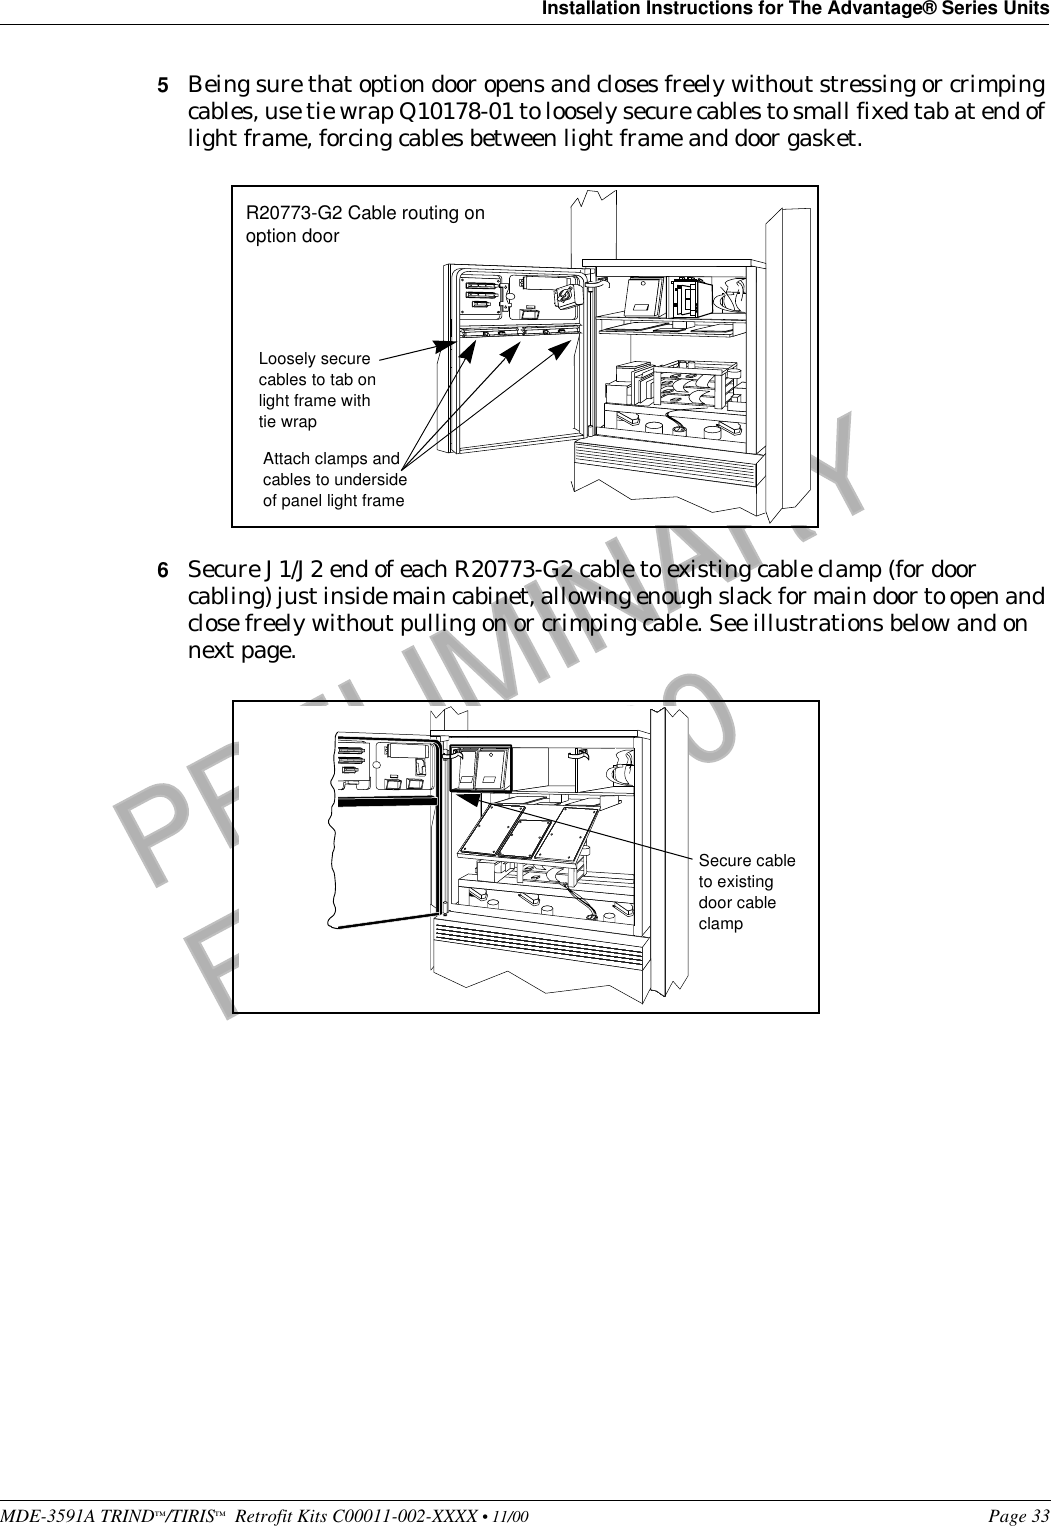 MDE-3591A TRIND™/TIRIS™  Retrofit Kits C00011-002-XXXX • 11/00 Page 33Installation Instructions for The Advantage® Series UnitsPRELIMINARYFCC 11/305Being sure that option door opens and closes freely without stressing or crimping cables, use tie wrap Q10178-01 to loosely secure cables to small fixed tab at end of light frame, forcing cables between light frame and door gasket. 6Secure J1/J2 end of each R20773-G2 cable to existing cable clamp (for door cabling) just inside main cabinet, allowing enough slack for main door to open and close freely without pulling on or crimping cable. See illustrations below and on next page.Attach clamps and cables to underside of panel light frameLoosely secure cables to tab on light frame with tie wrapR20773-G2 Cable routing on option door Secure cable to existing door cable clamp